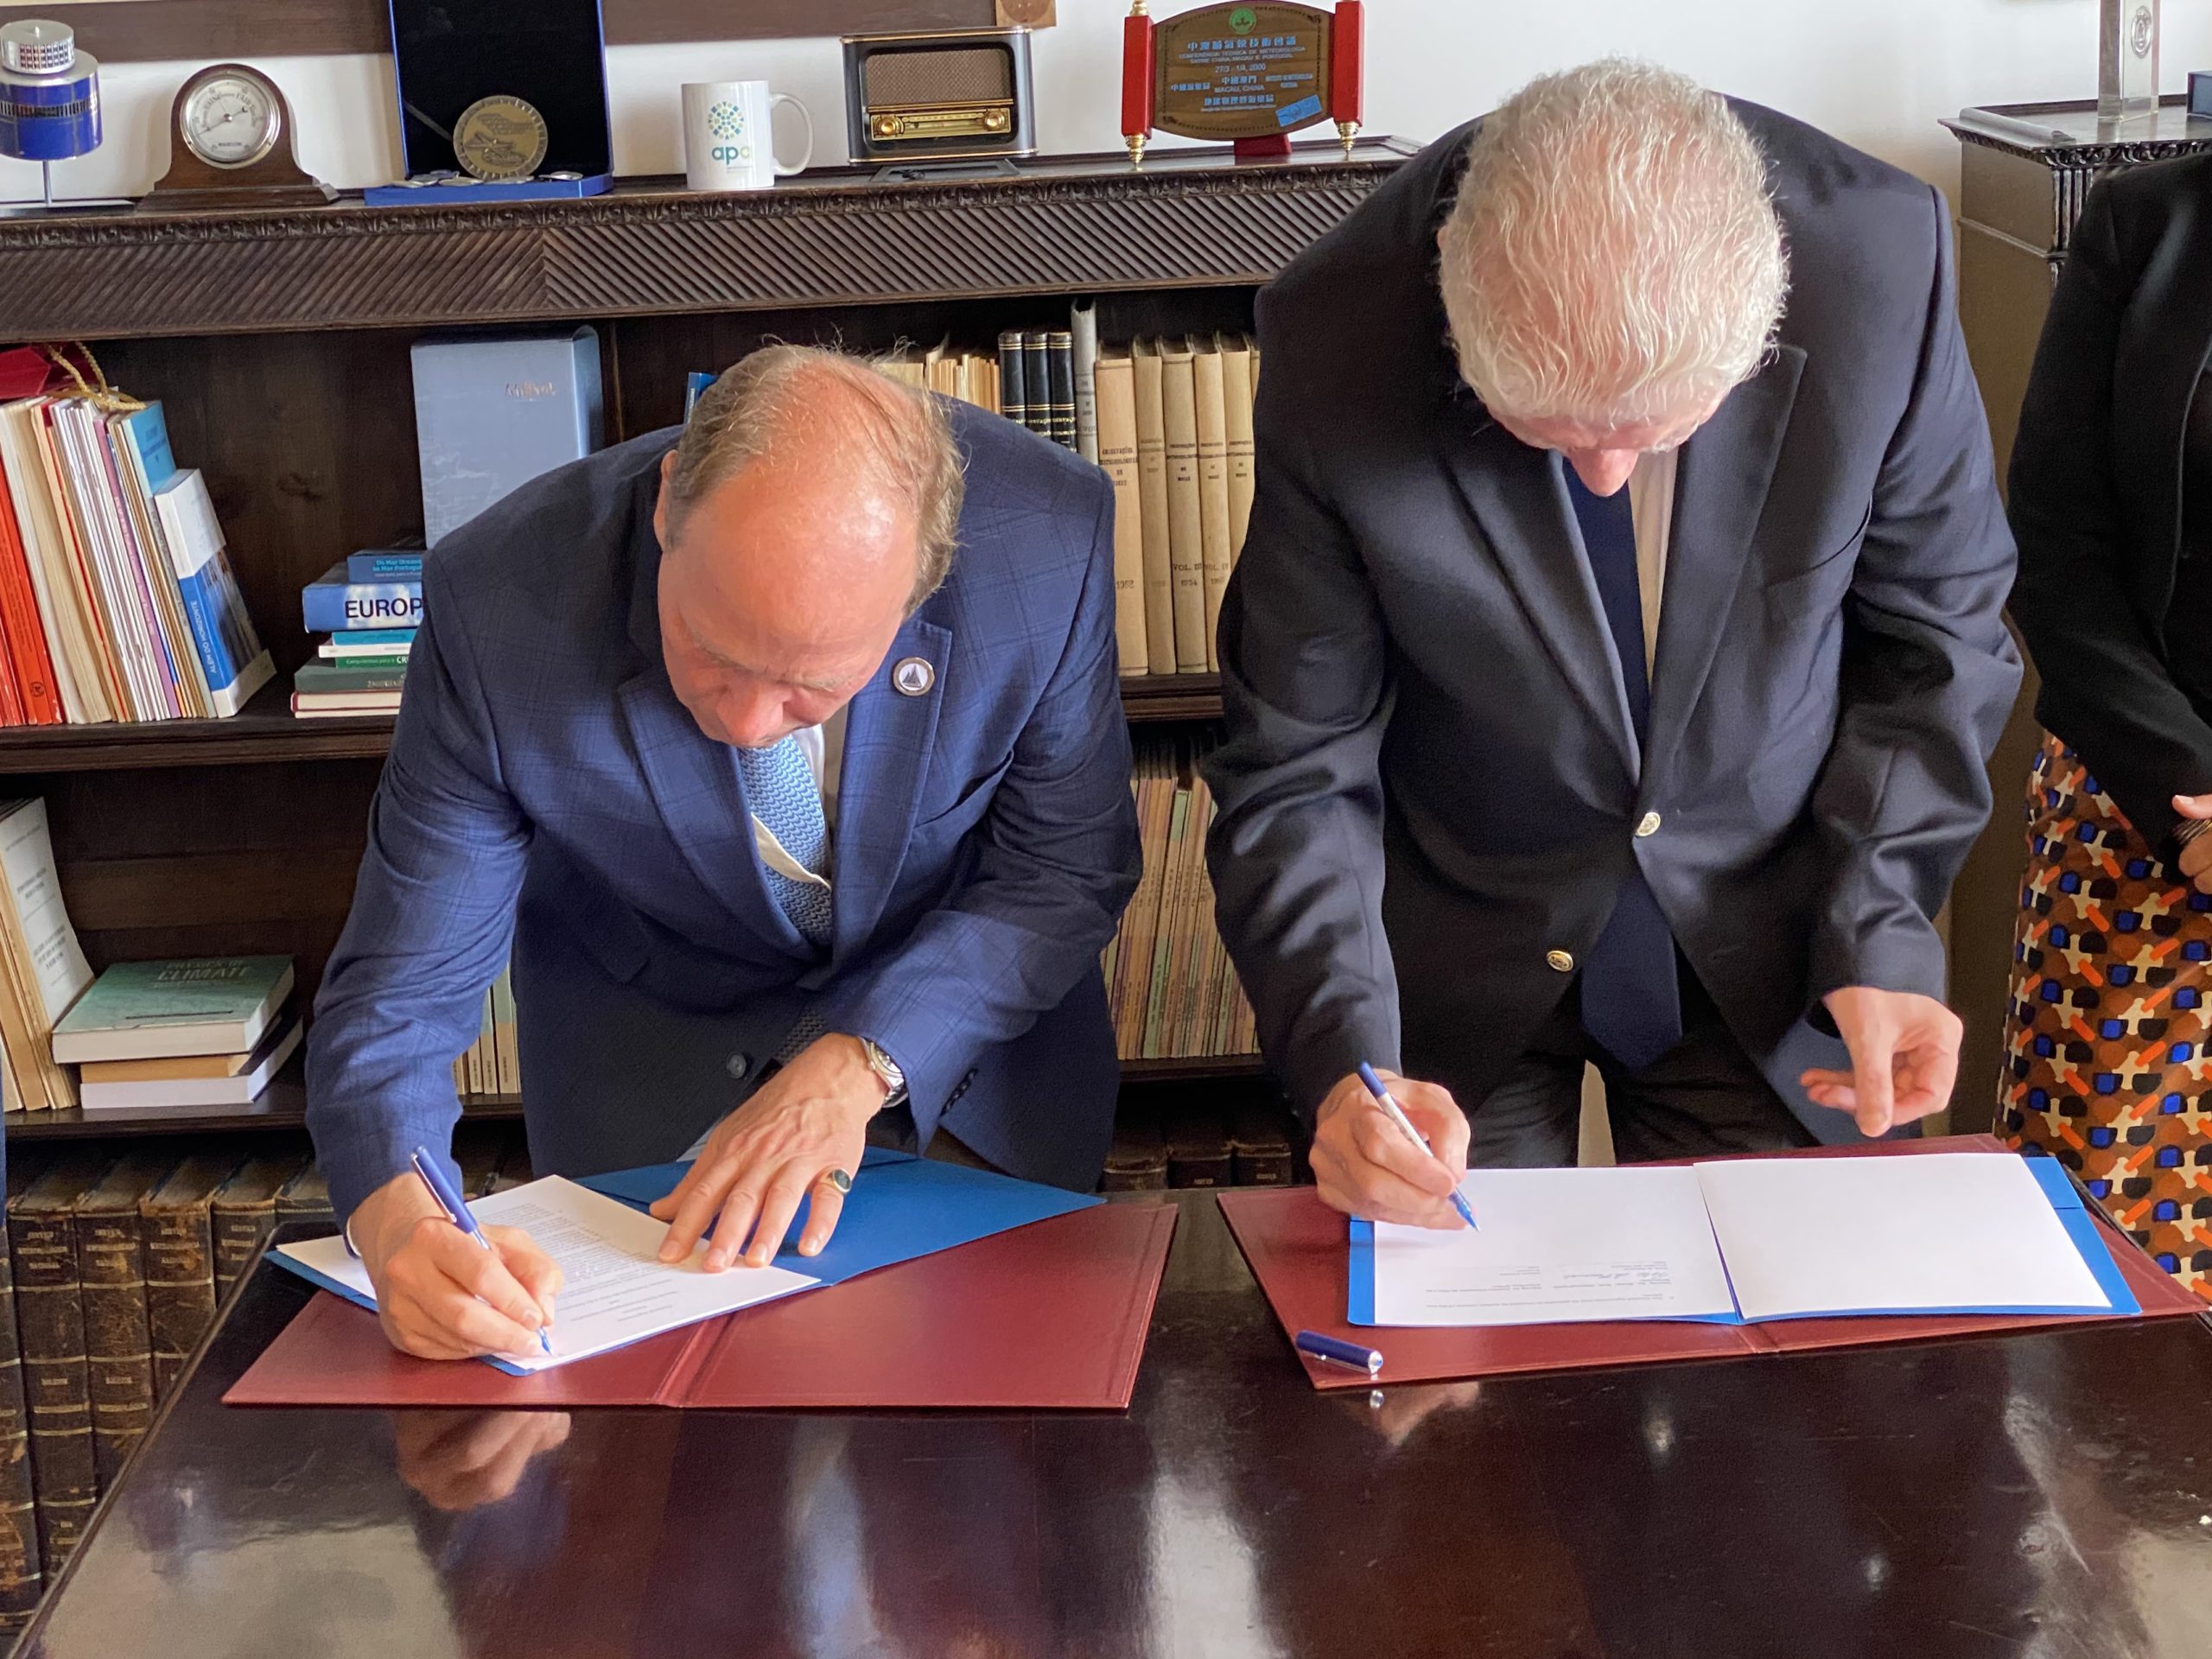 Peter de Menocal (left), President and Director, Woods Hole Oceanographic Institution (WHOI) and Miguel Miranda, President of  Instituto Português do Mar e da Atmosfera (IPMA) sign a memorandum of understanding establishing areas of mutual cooperation.  The signing took place in Lisbon, Portugal, where WHOI and IPMA are attending the UN Ocean Conference. © Woods Hole Oceanographic Institution